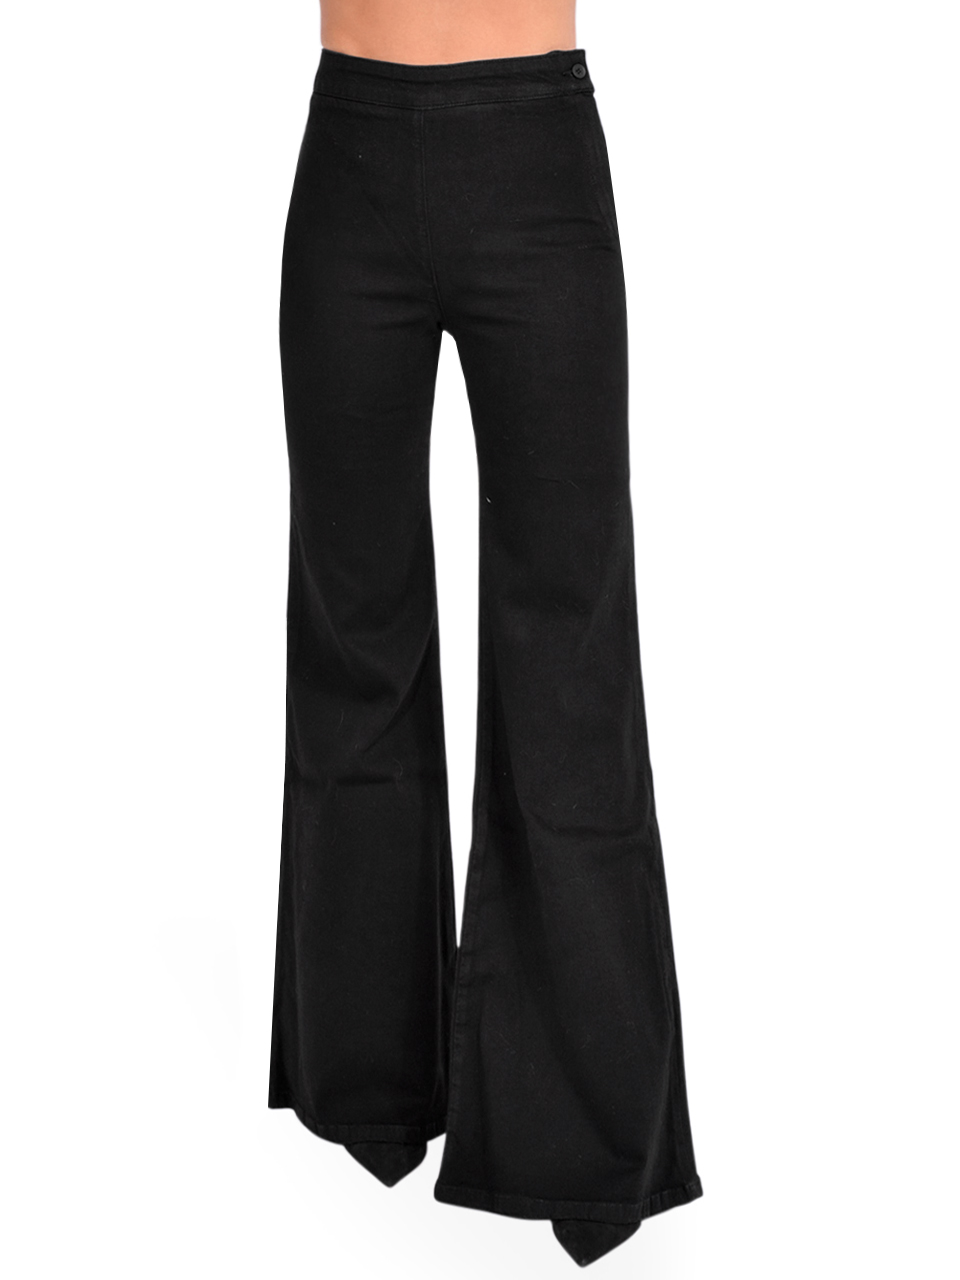 Ottod'Ame Bell Bottom Wide Leg Jeans in Black Front View